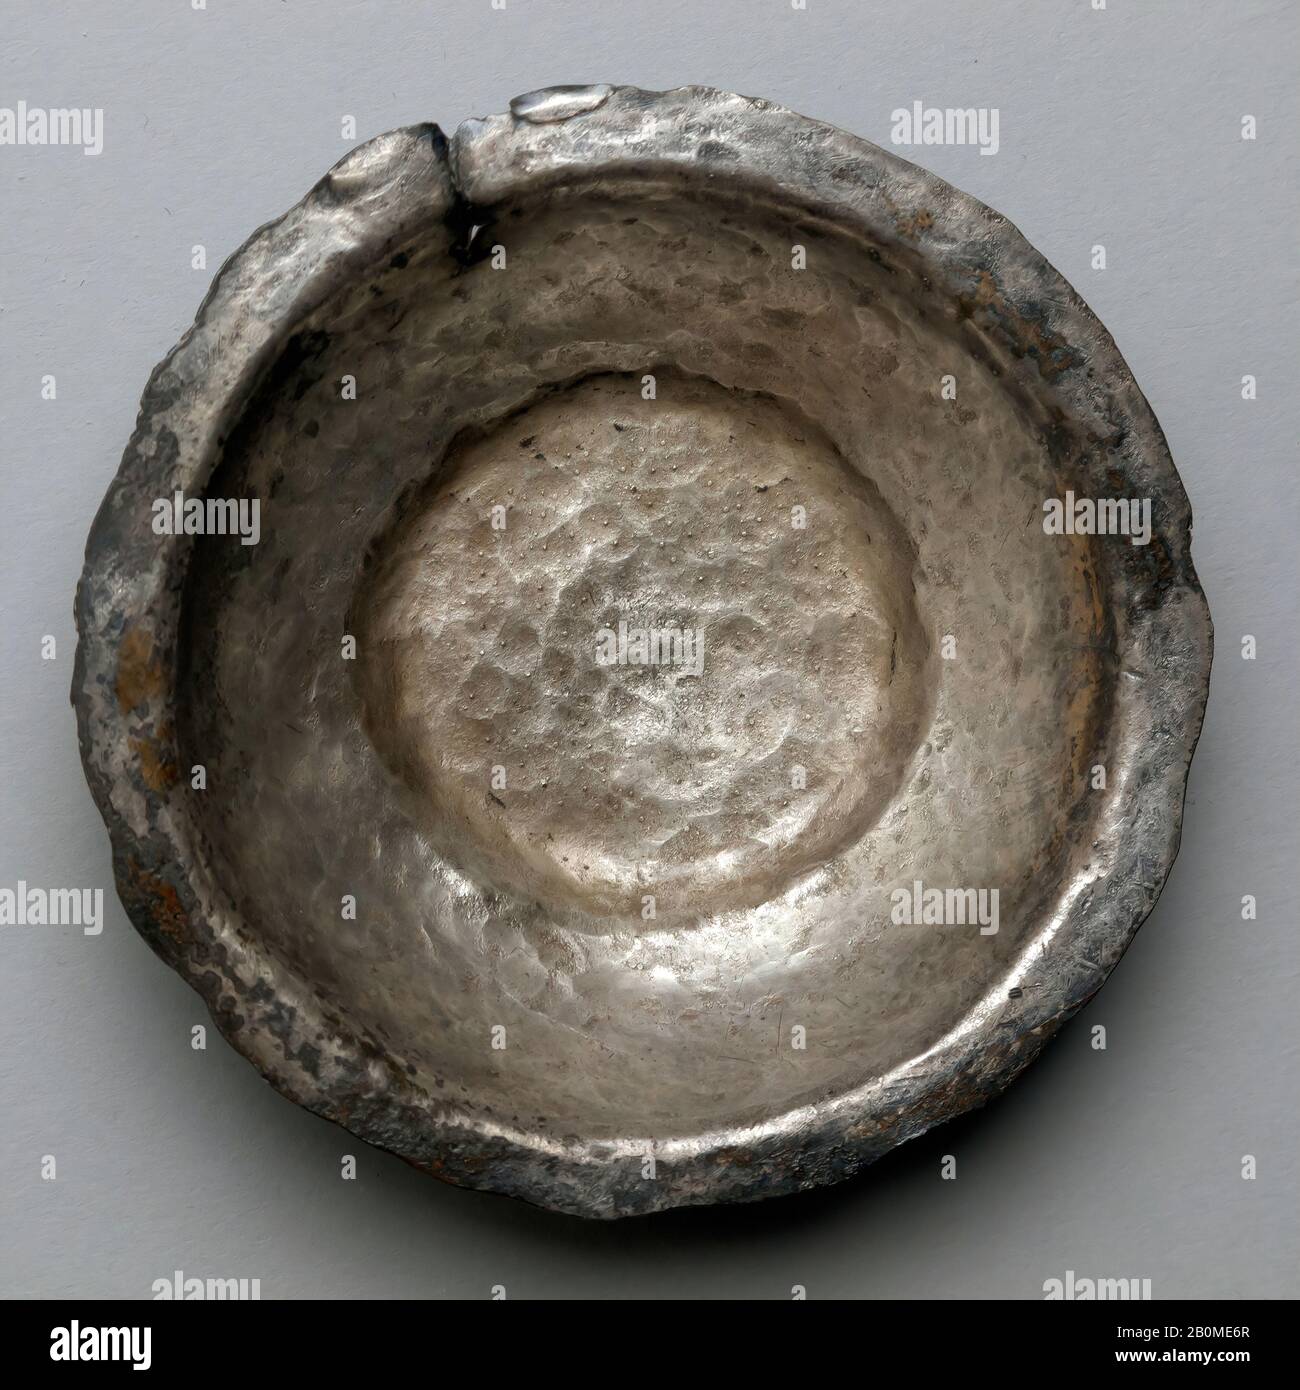 Bowl, Silver, Diameter: 3 7/16 in. (8.7 cm), Height: 3/4 in. (1.9 cm), Gold and Silver Stock Photo